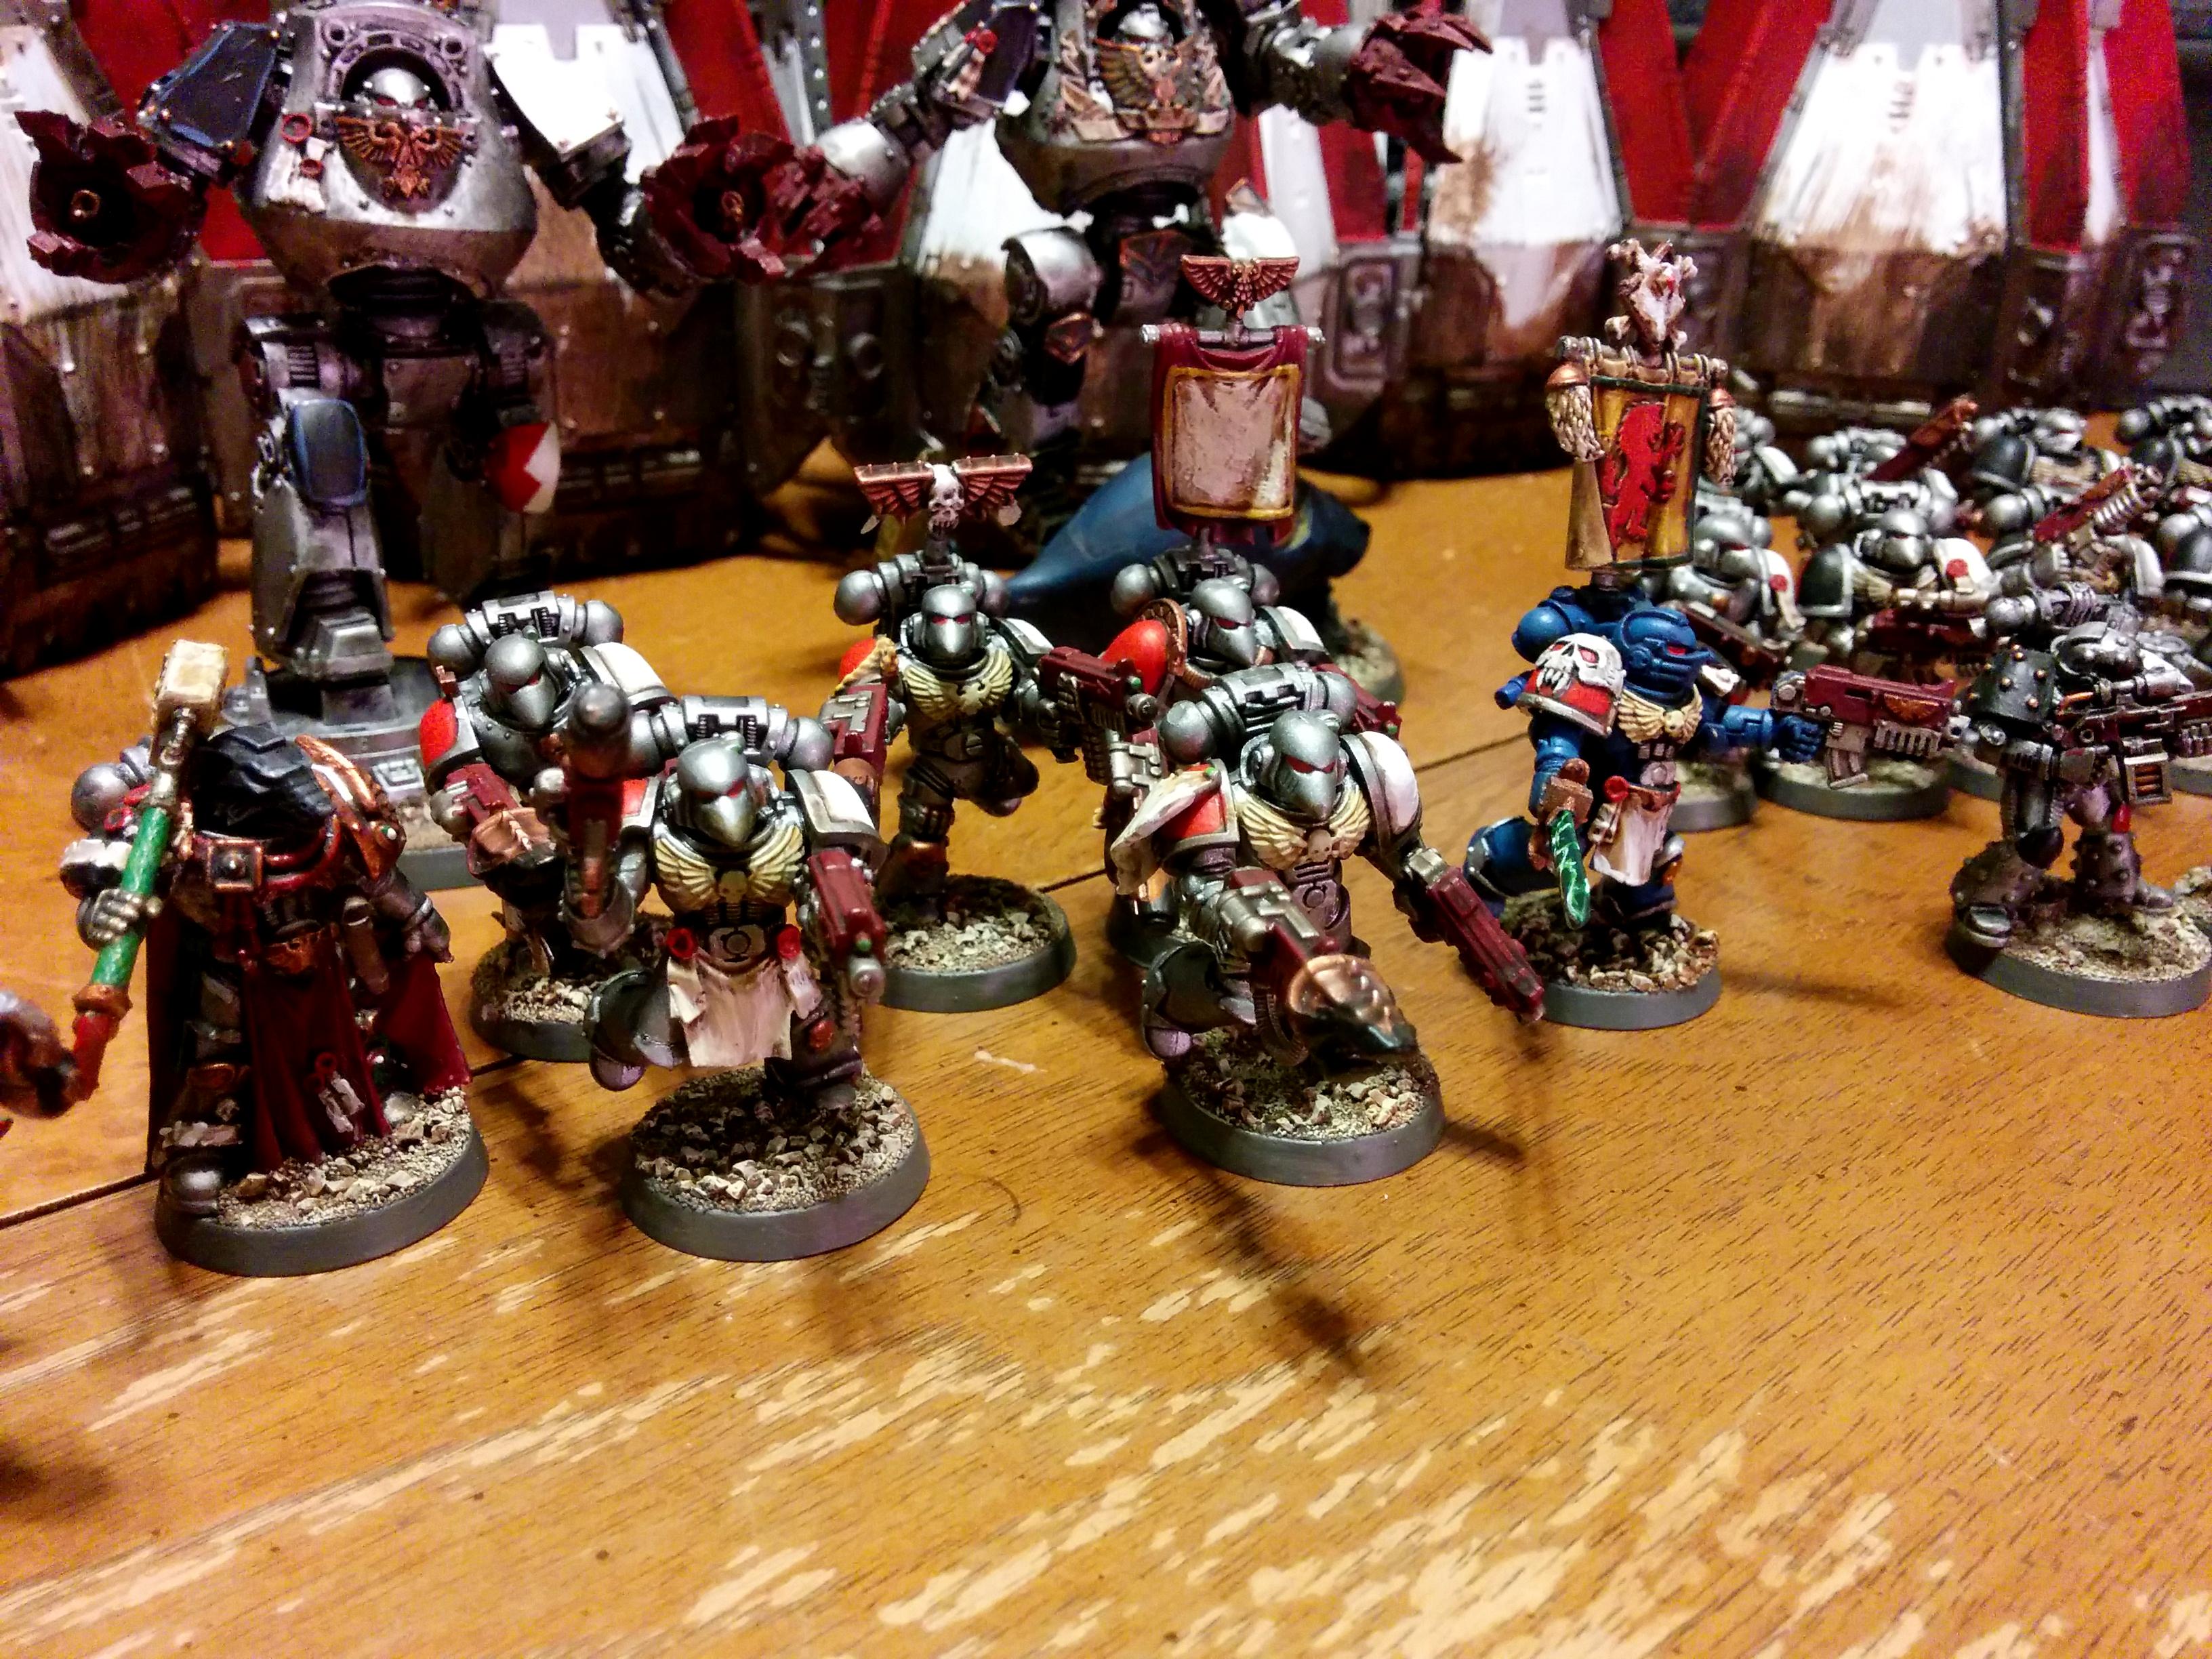 Command Squad, Contemptor, Drop Pods, Forge World, Pre-heresy, Salamanders, Space Wolves